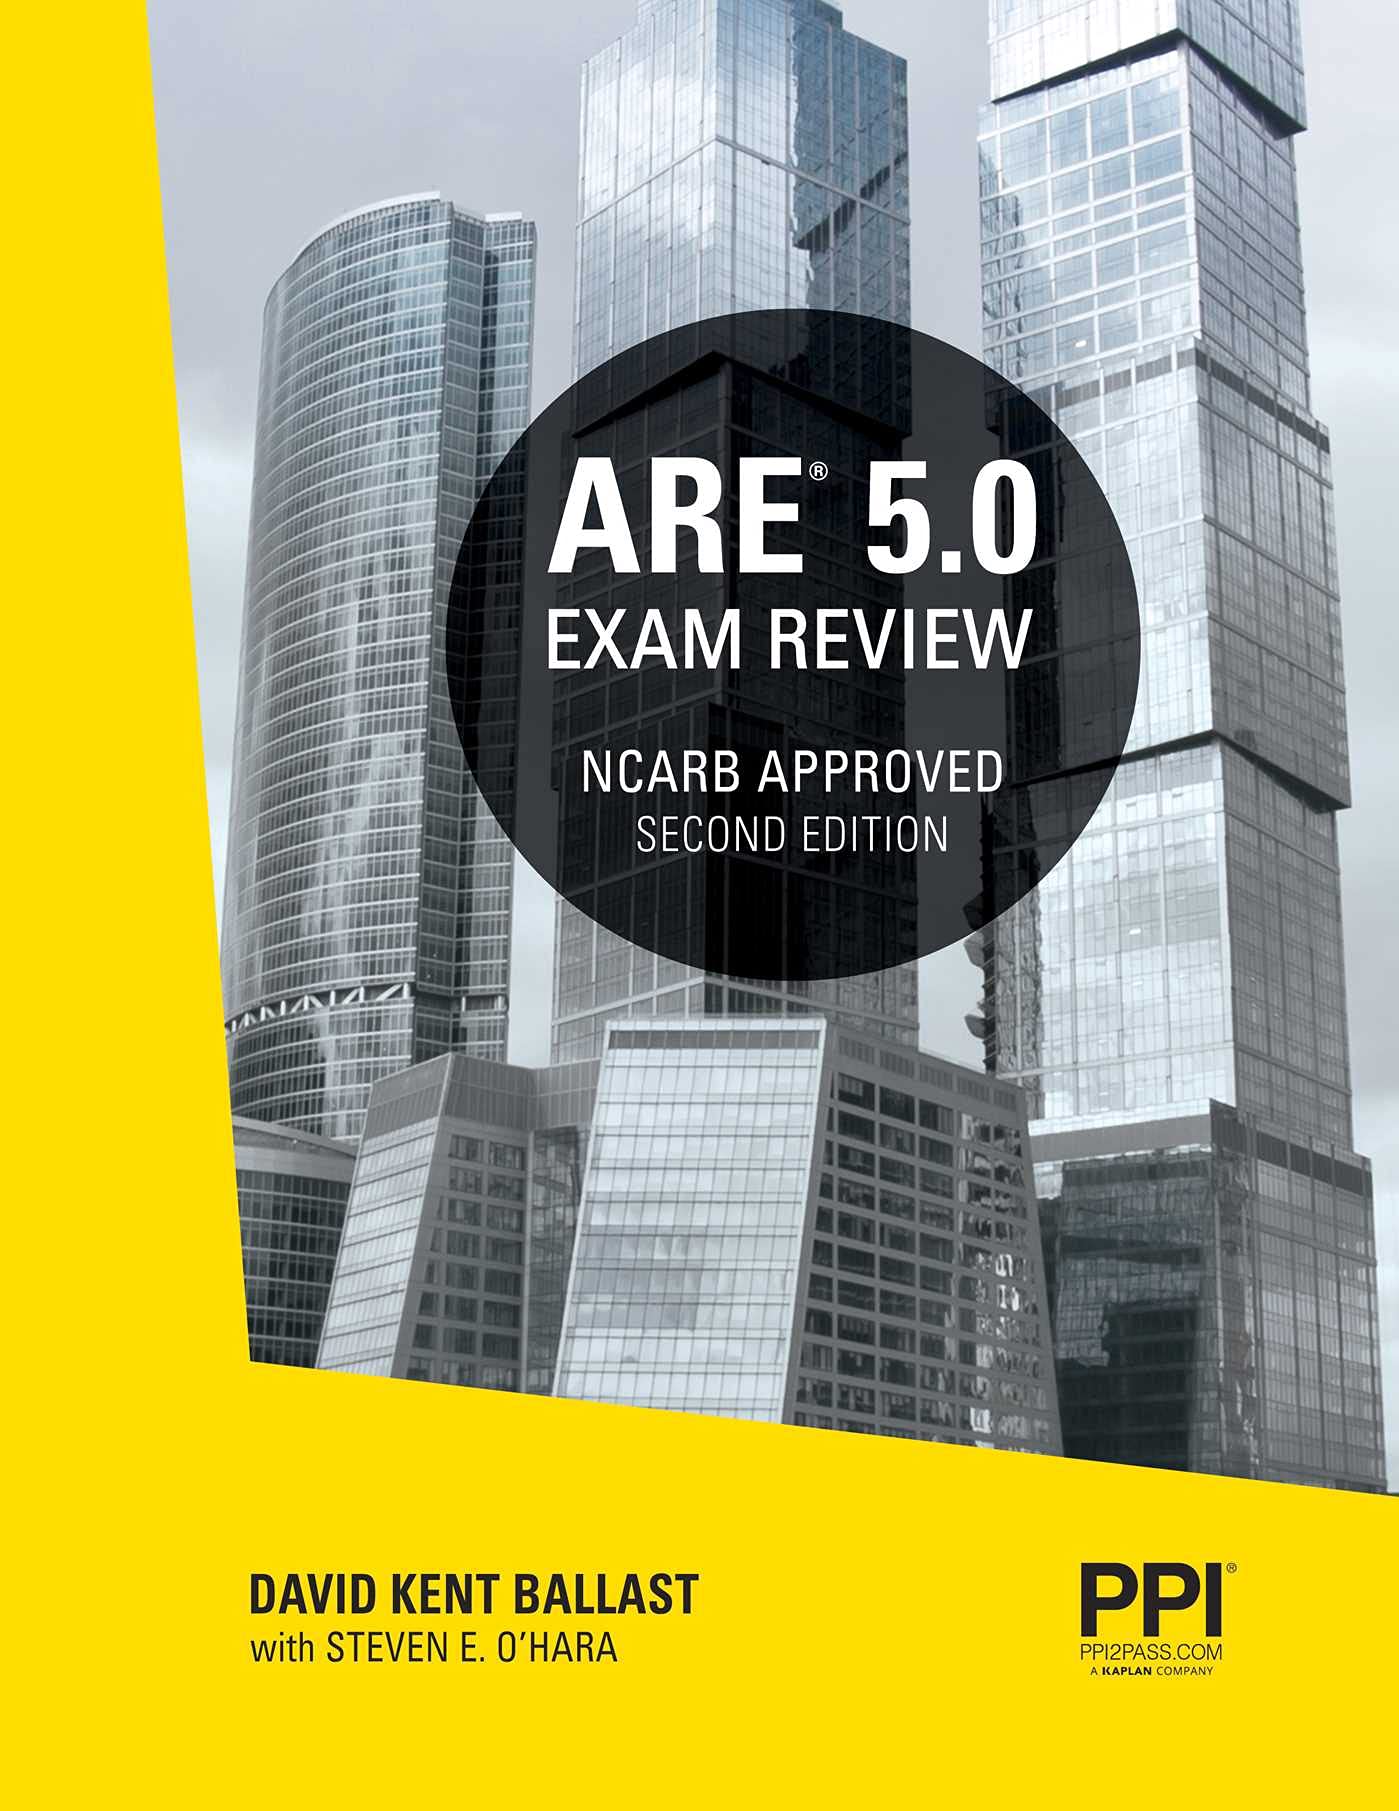 PPI ARE 5.0 Exam Review All Six Divisions, 2nd Edition – Comprehensive Review Manual for the NCARB ARE 5.0 Exam